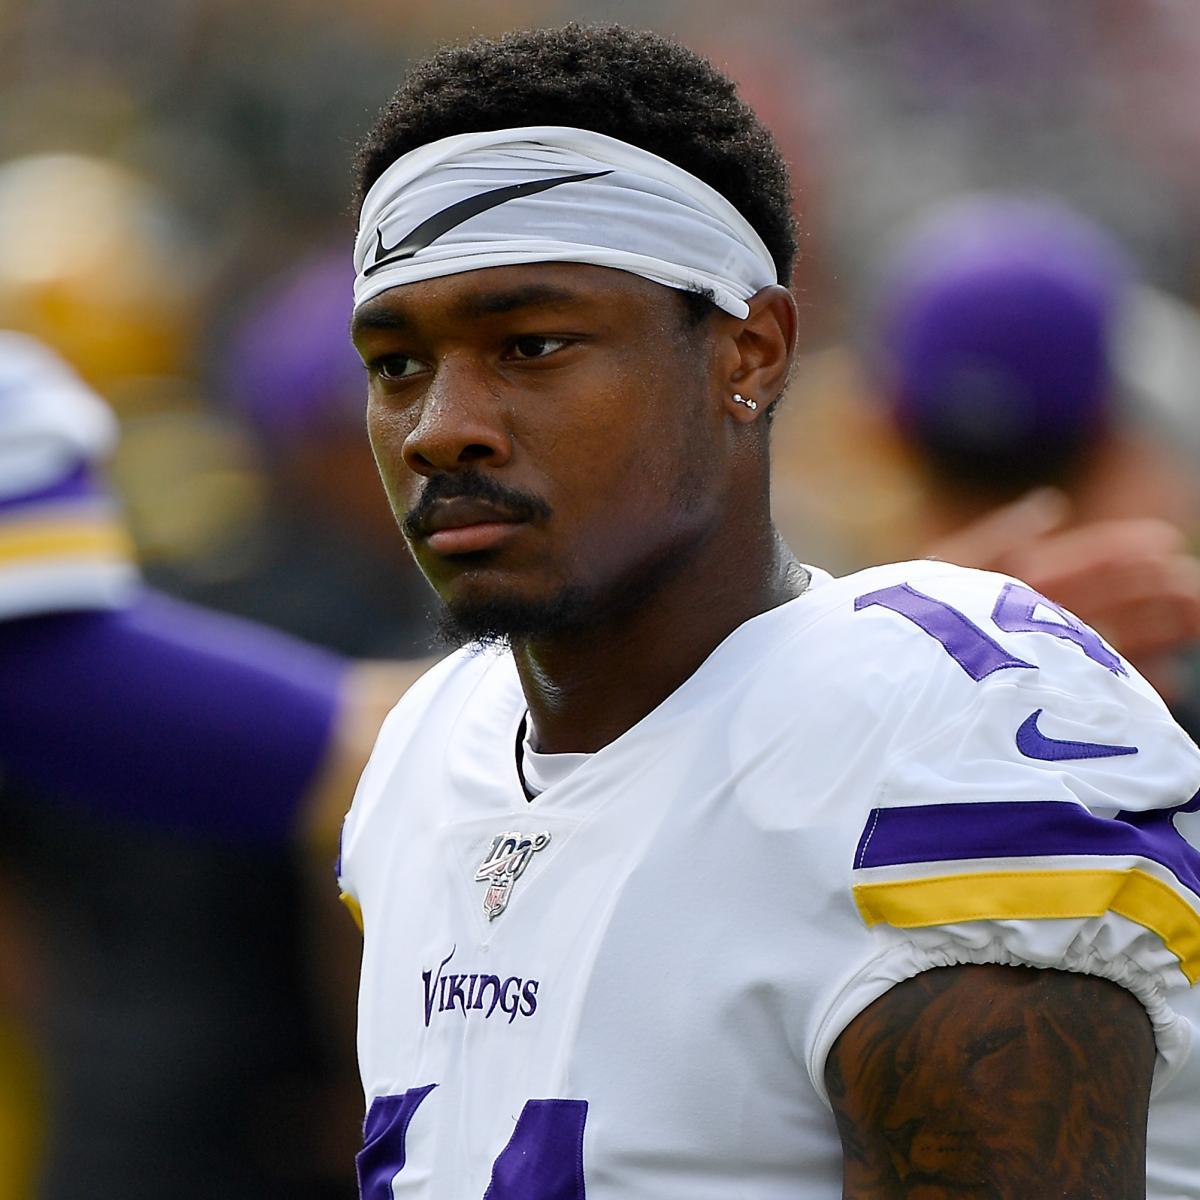 Diggs' trade to Bills paid off for Vikes, too, as teams meet